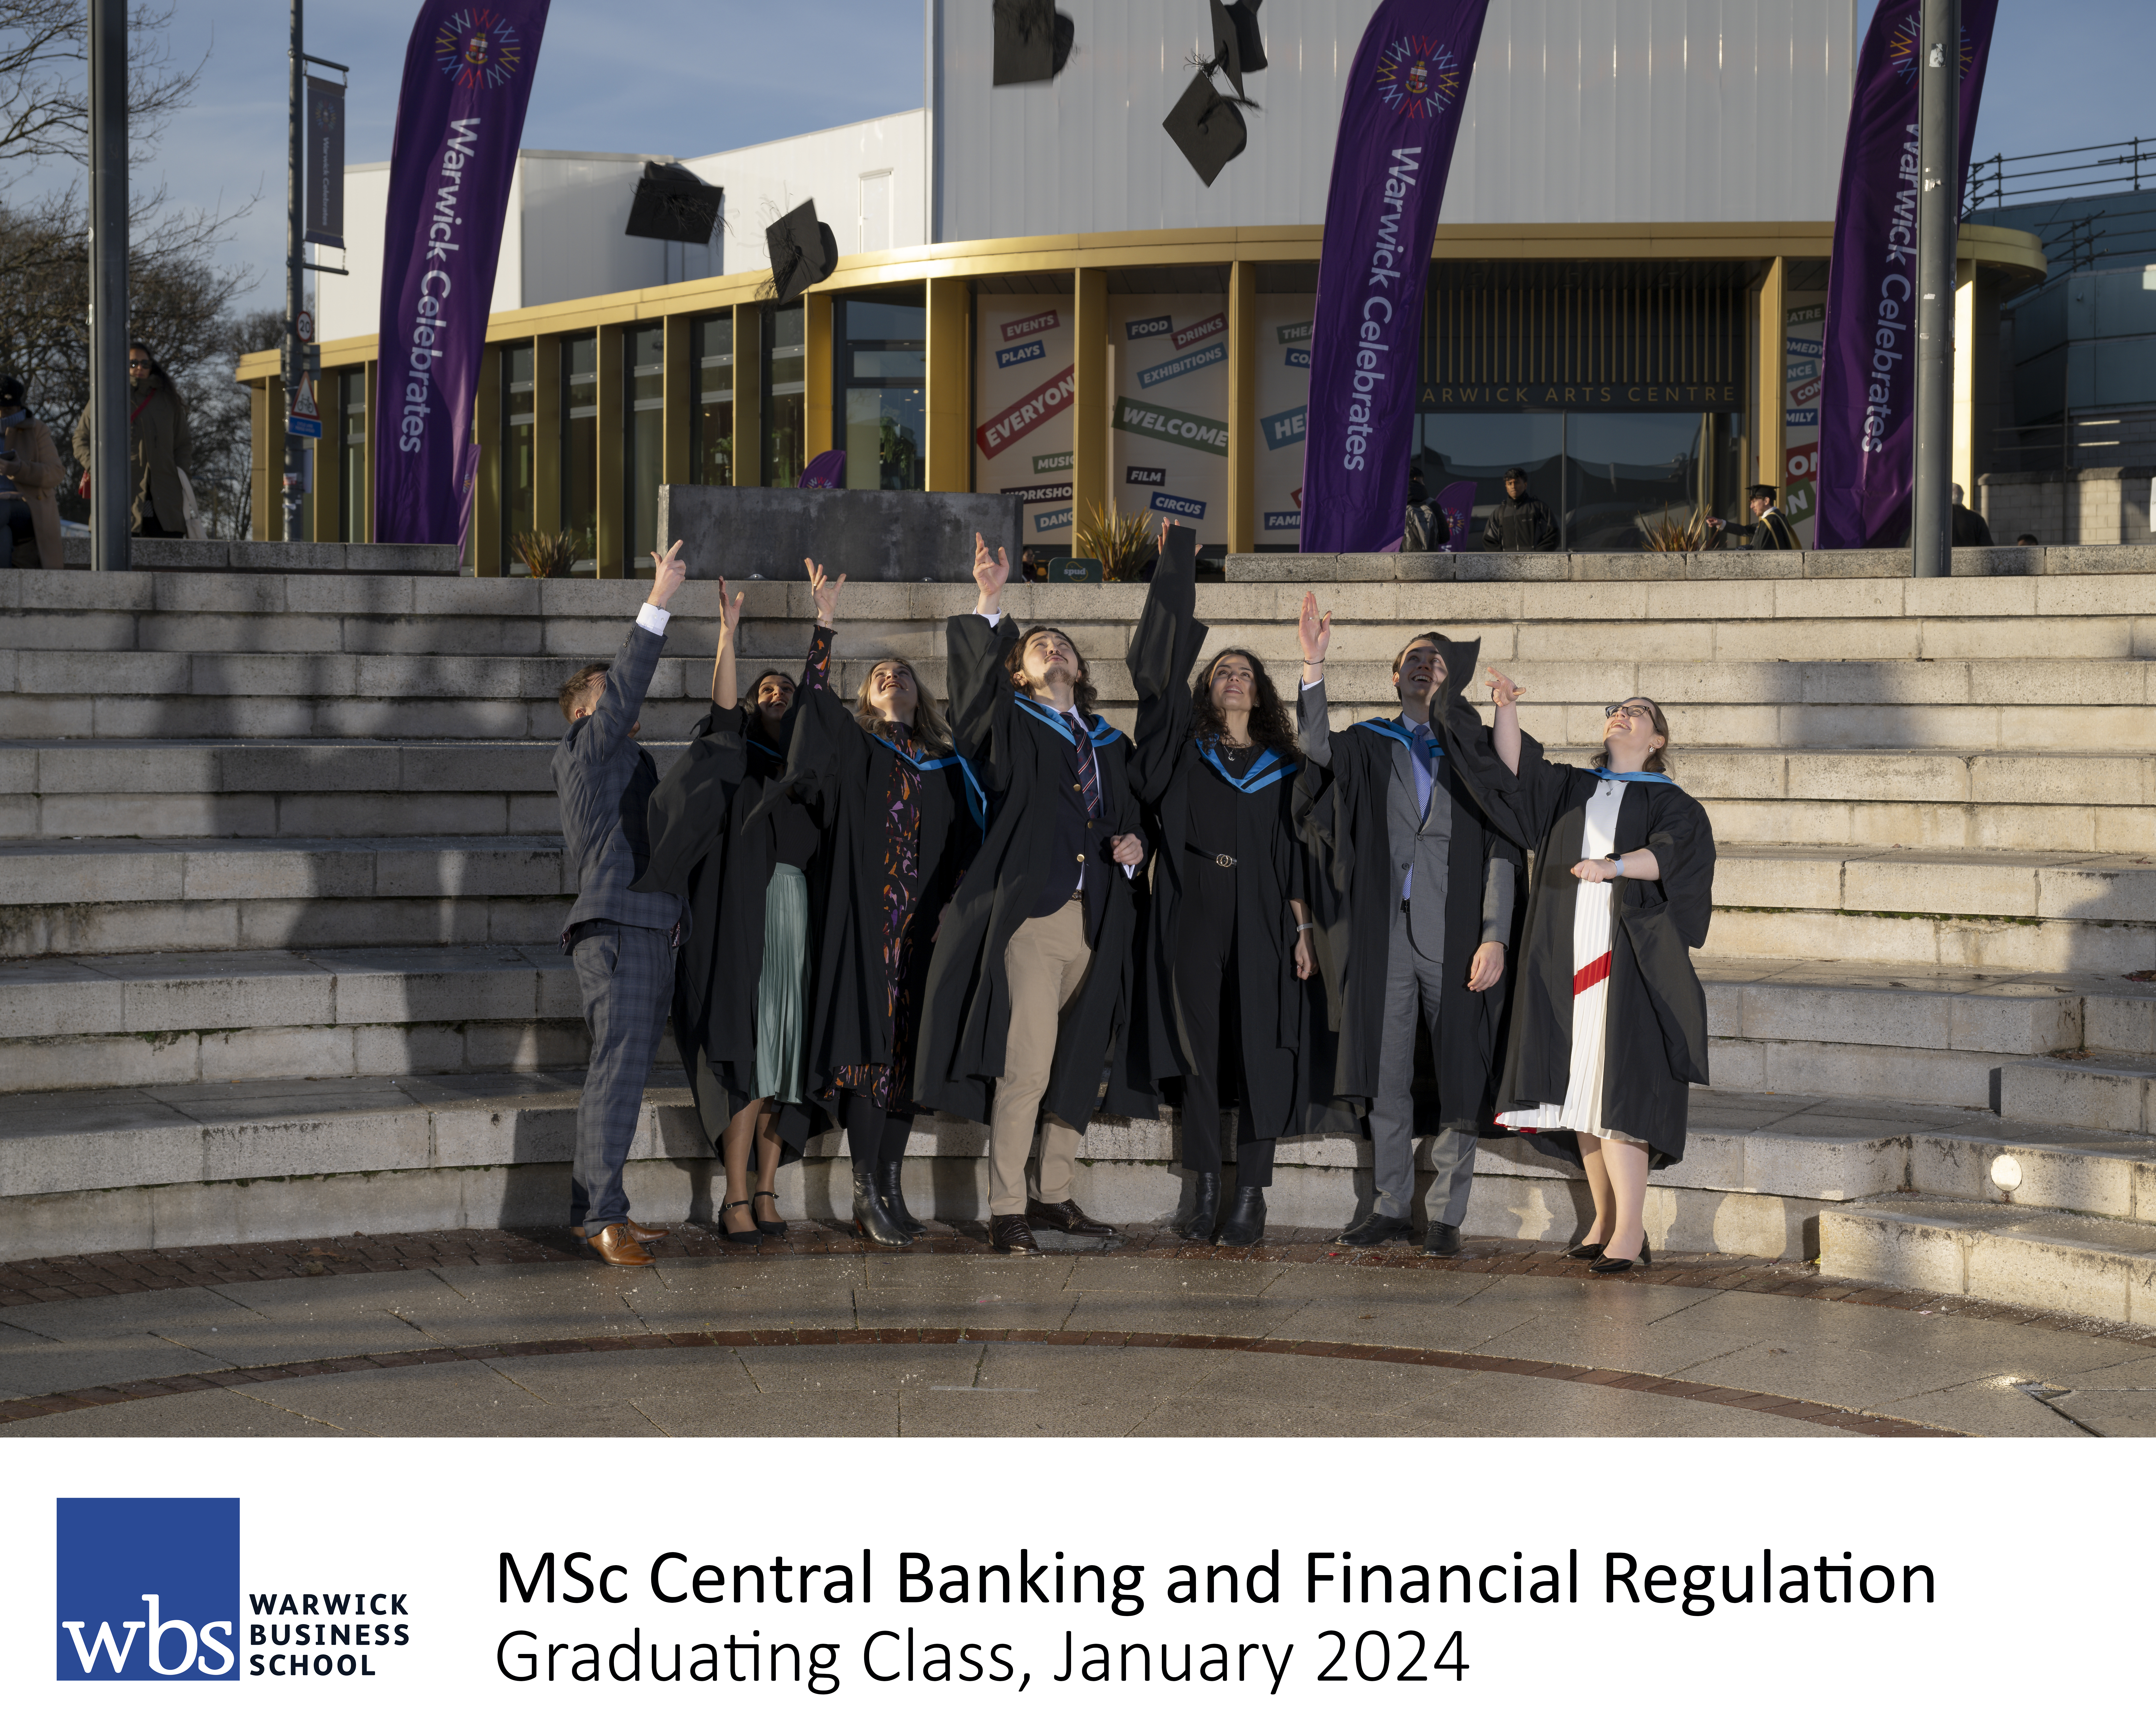 wbs_grad_jan24_-_msc_central_banking_and_financial_regulation_hats_1_captioned.jpg